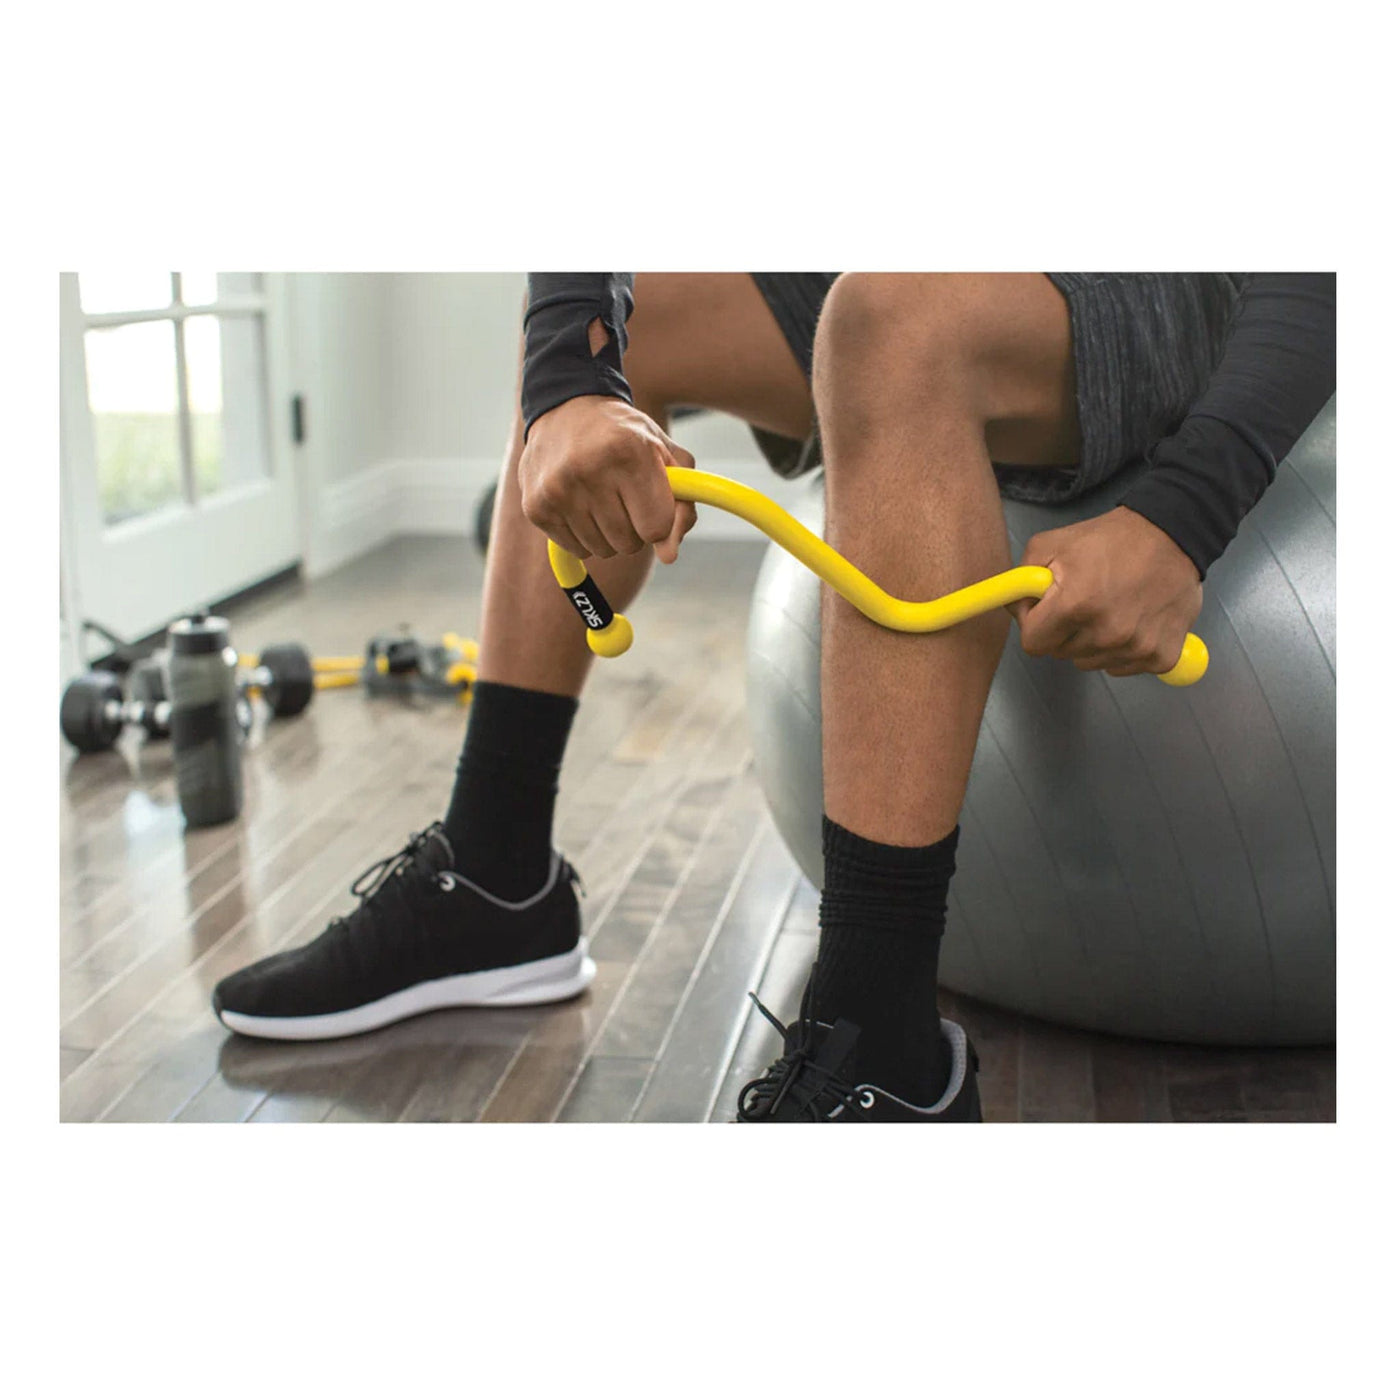 SKLZ Accustick - The Hockey Shop Source For Sports